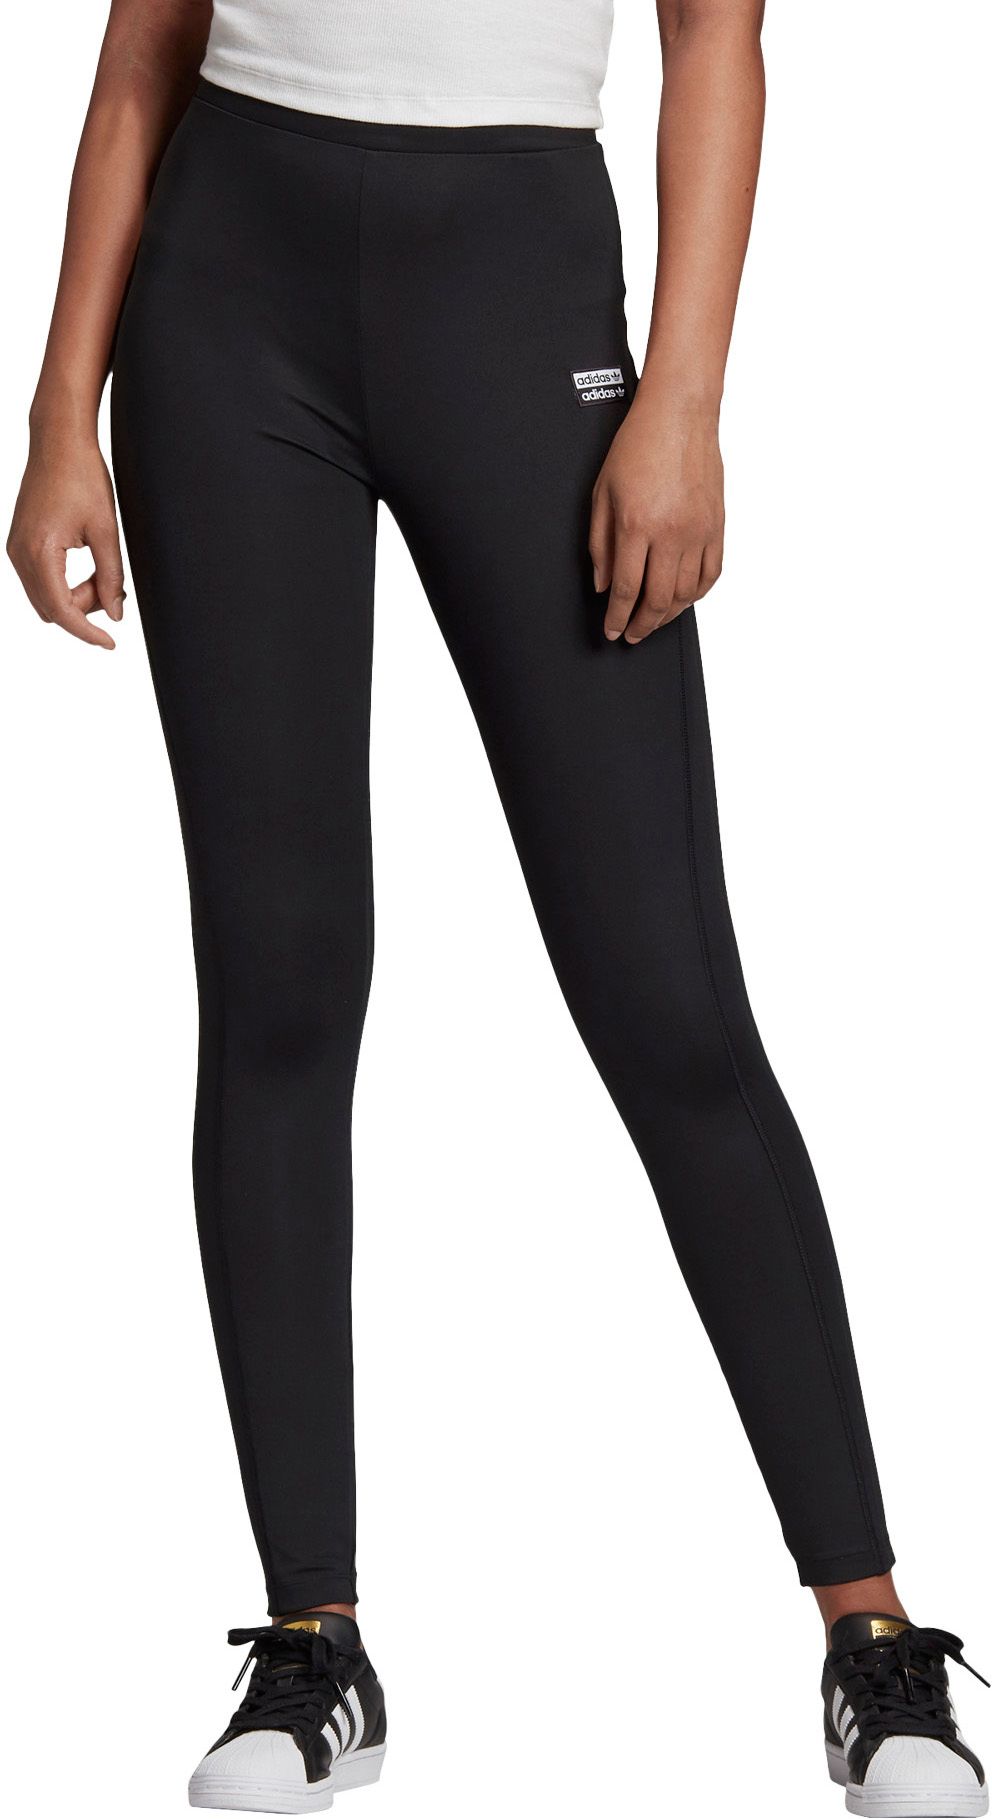 adidas quest long running tights ladies